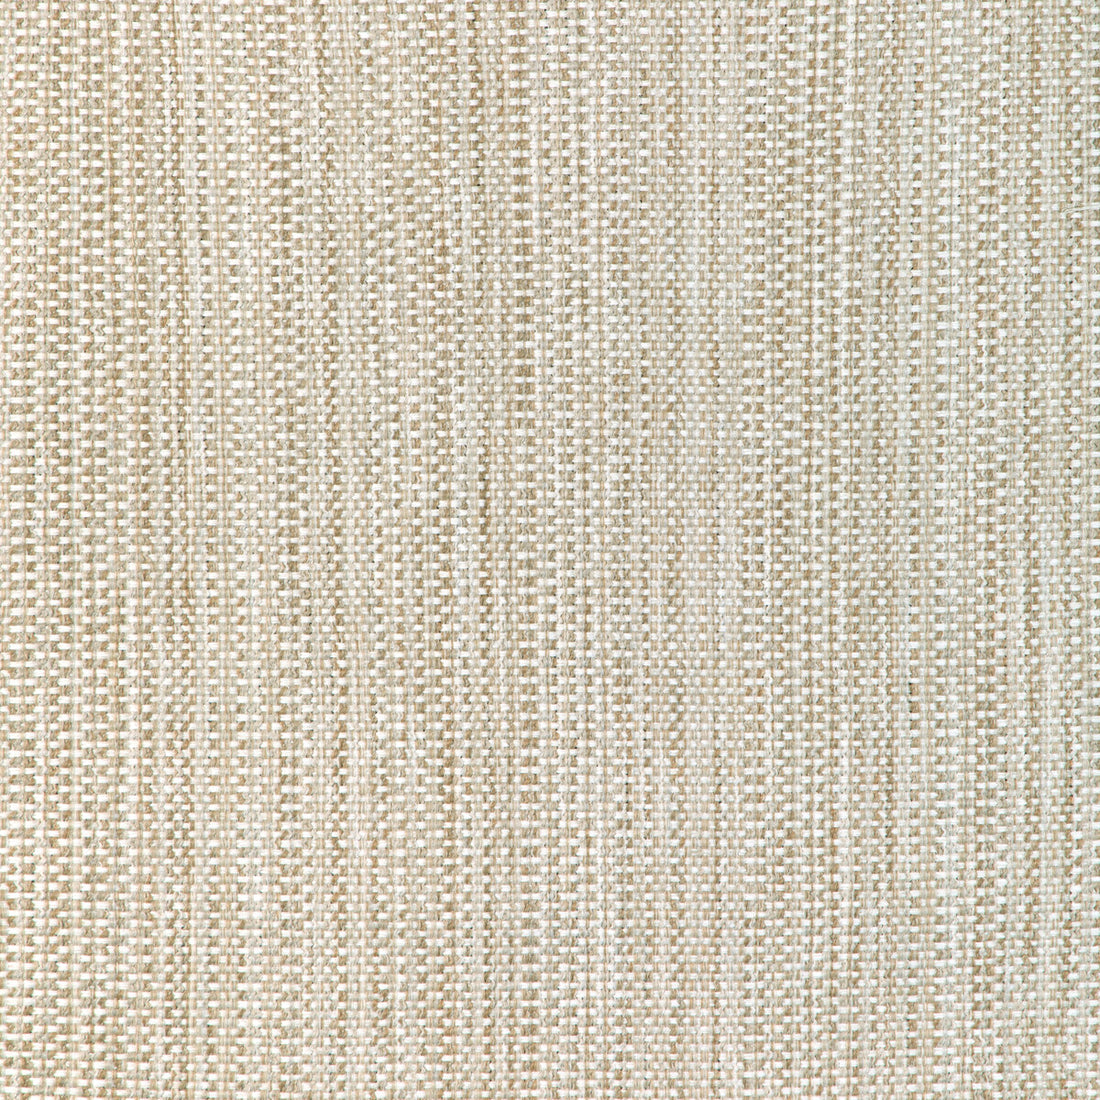 Kravet Smart fabric in 37018-106 color - pattern 37018.106.0 - by Kravet Smart in the Gis collection